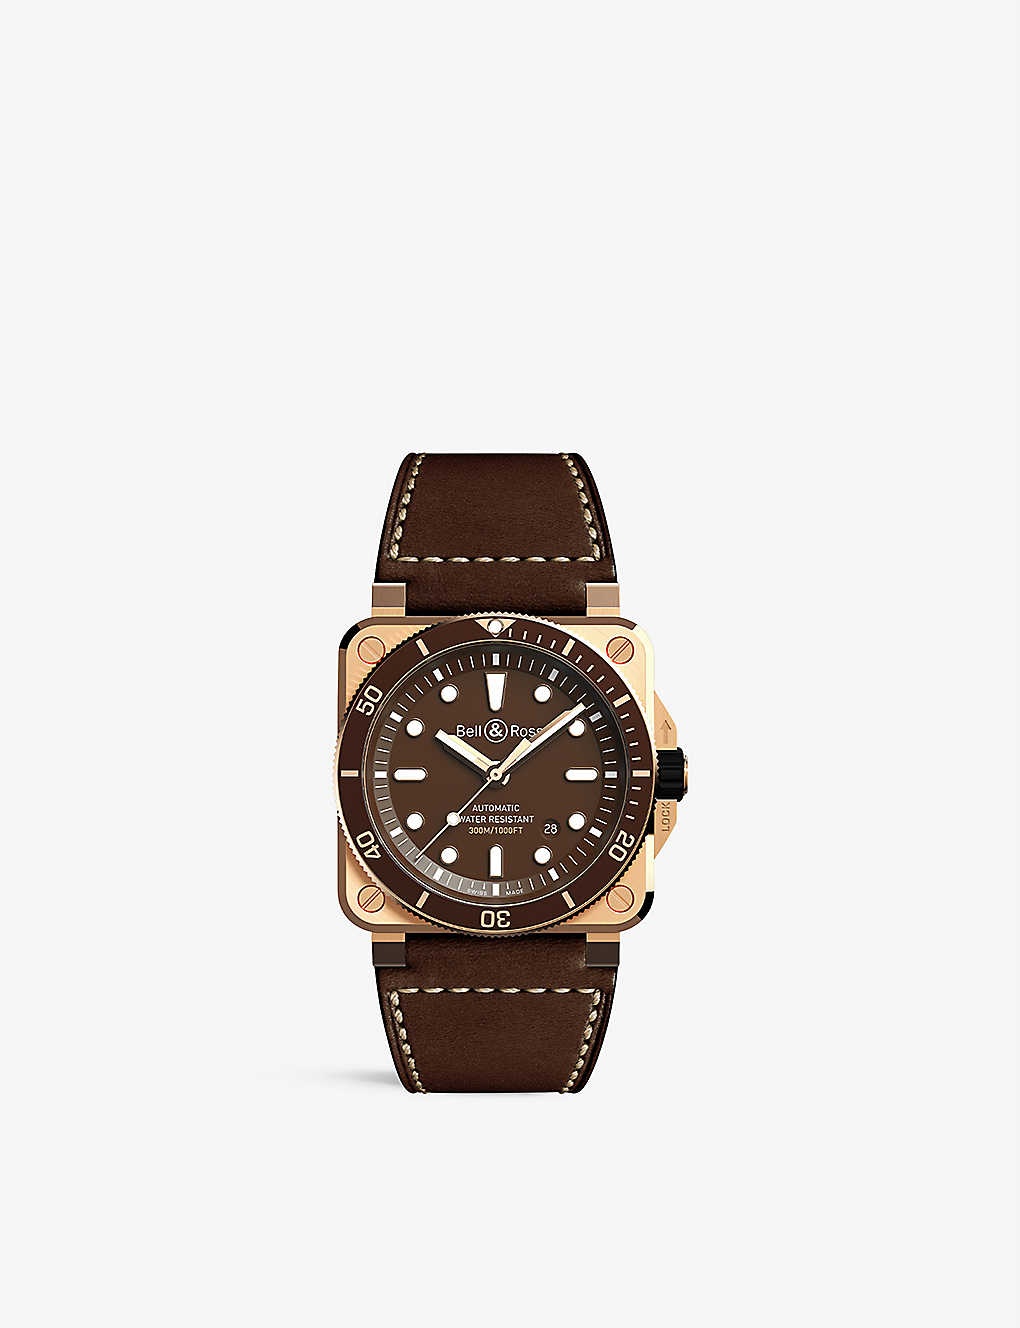 BR 03-92 Diver satin-polished bronze and leather automatic watch - 1